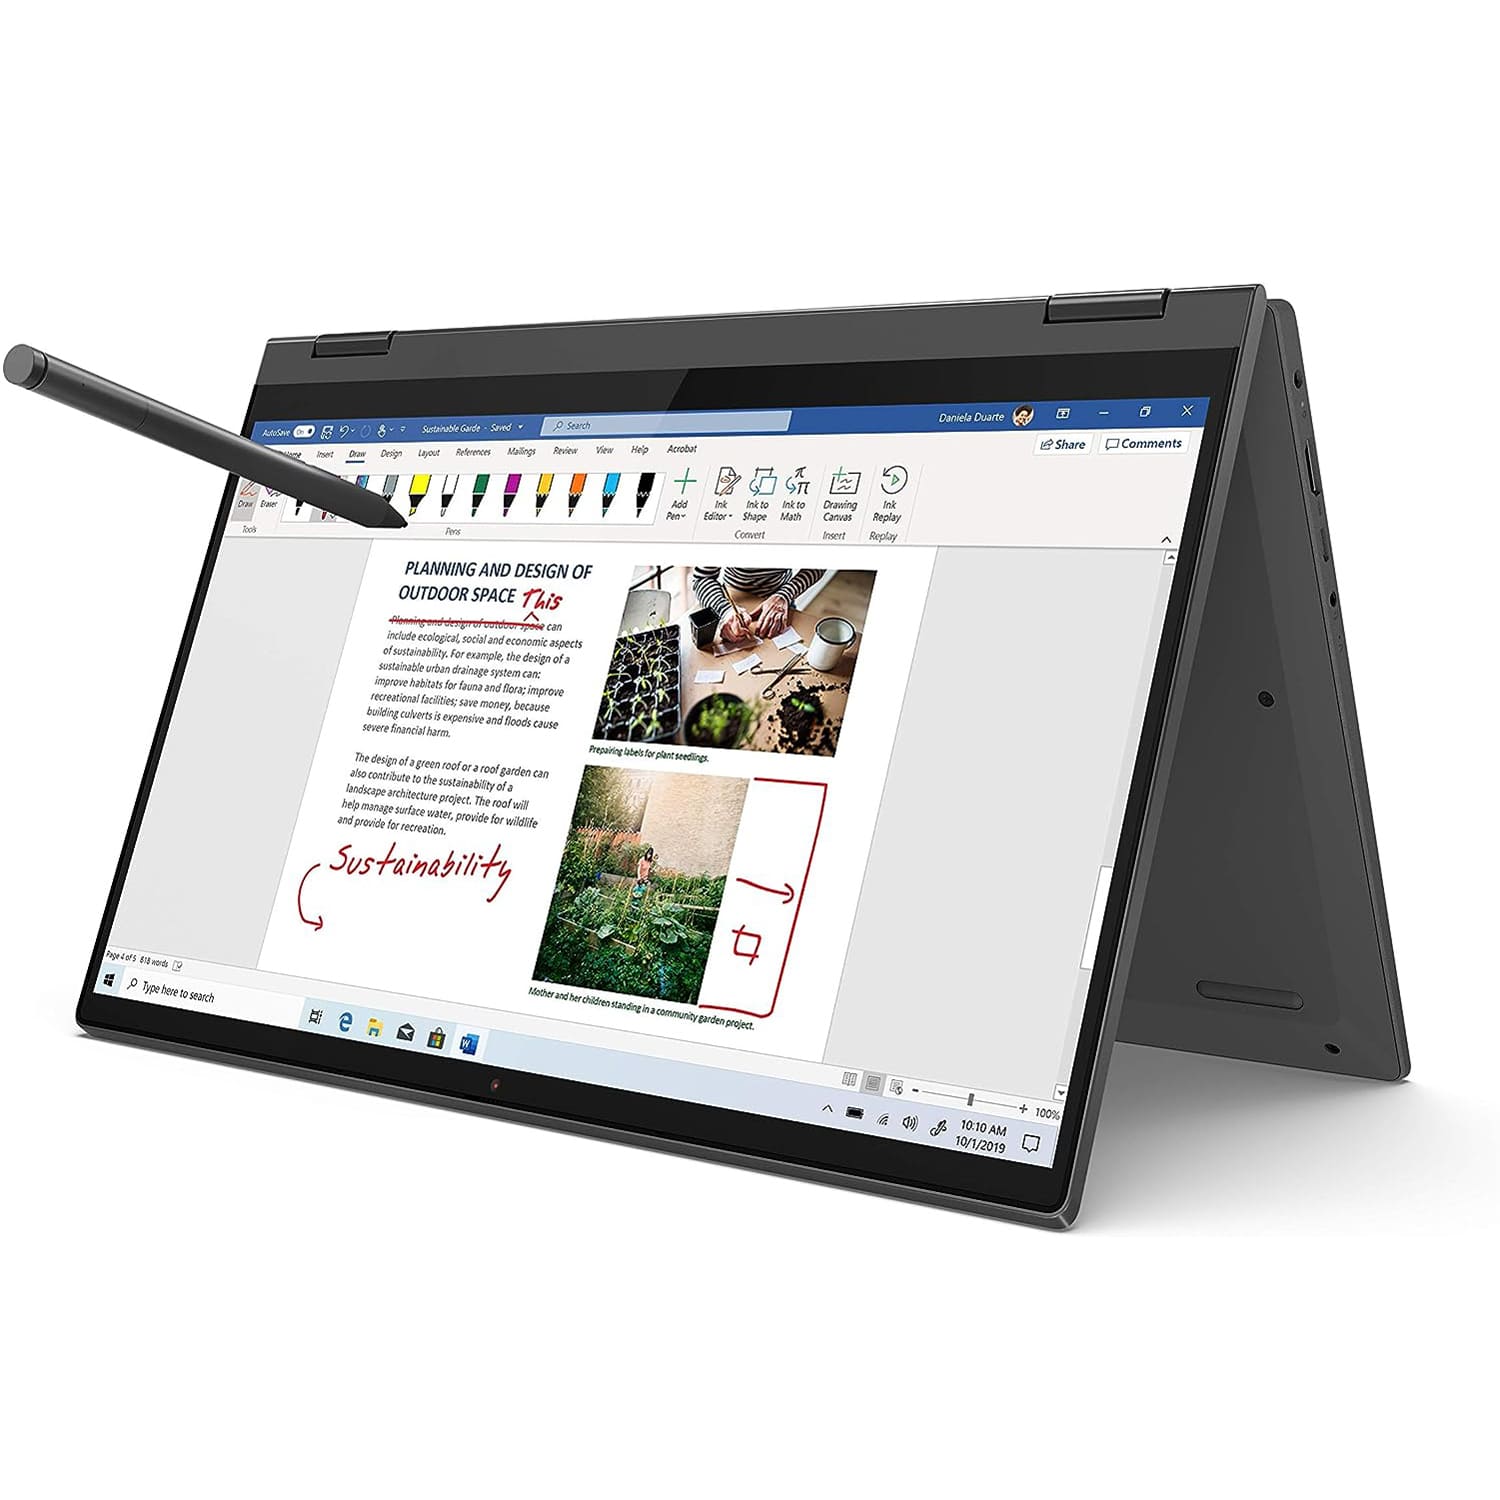  Buy Lenovo Flex 14 2-in-1 Convertible Laptop Stylus Pen, Active  Stylus Digital Capacitive Pen for Lenovo Flex 14 Convertible Laptop,High  Precision with Ultra Fine Tip,Touch-Control and Rechargeable,White Online  at Low Prices